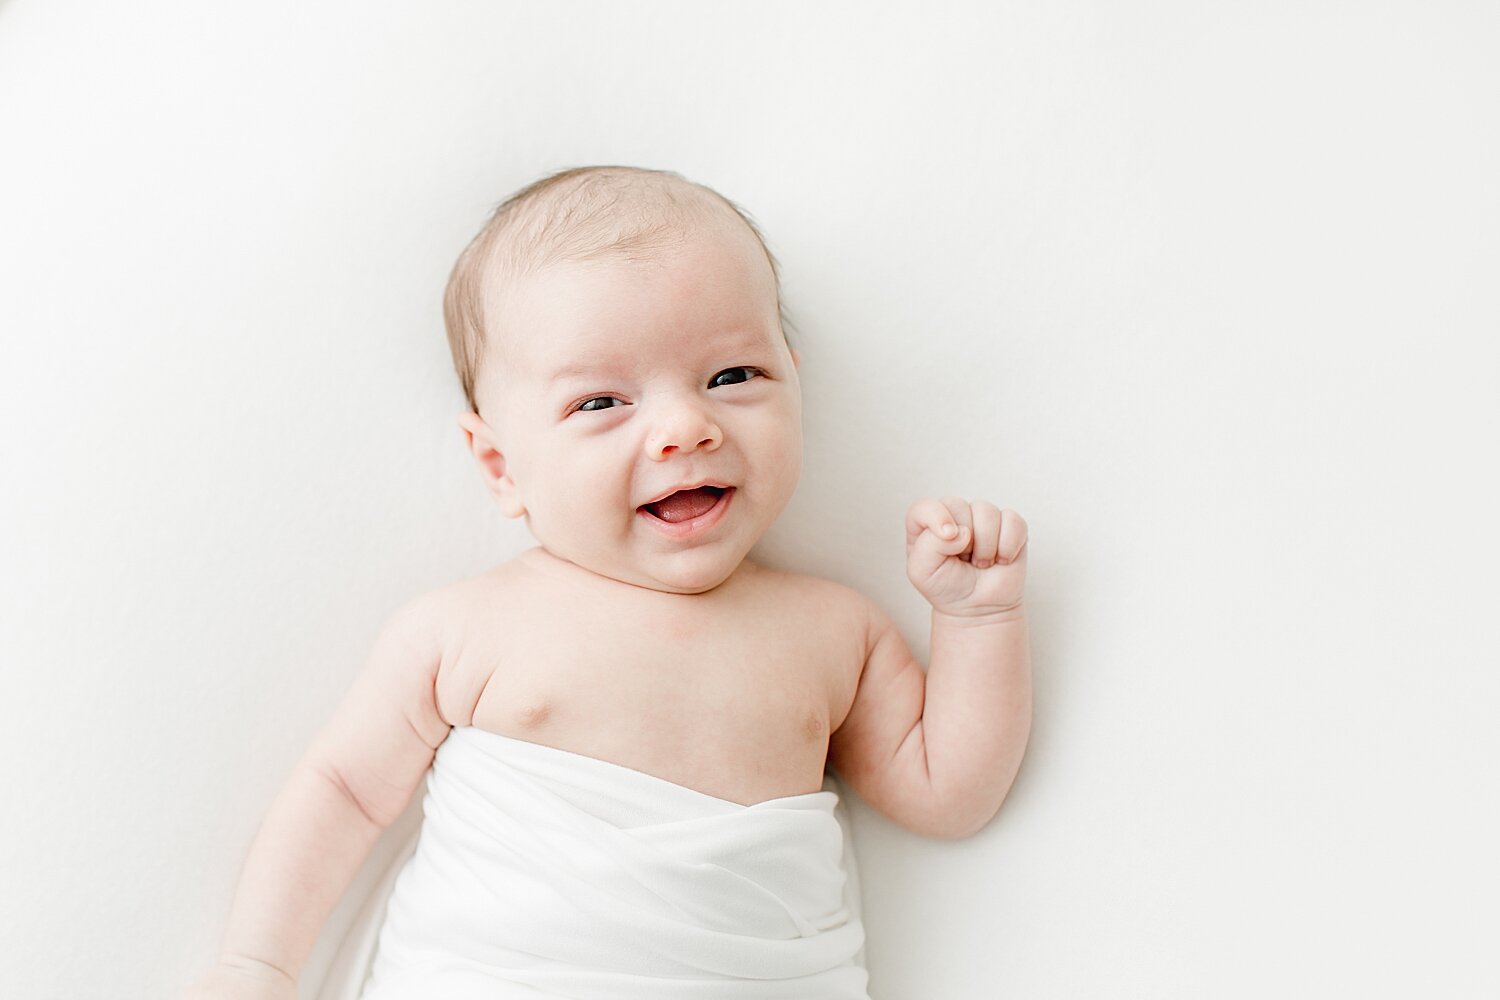 Baby boy awake and smiling for newborn session. Photos by Kristin Wood Photography.